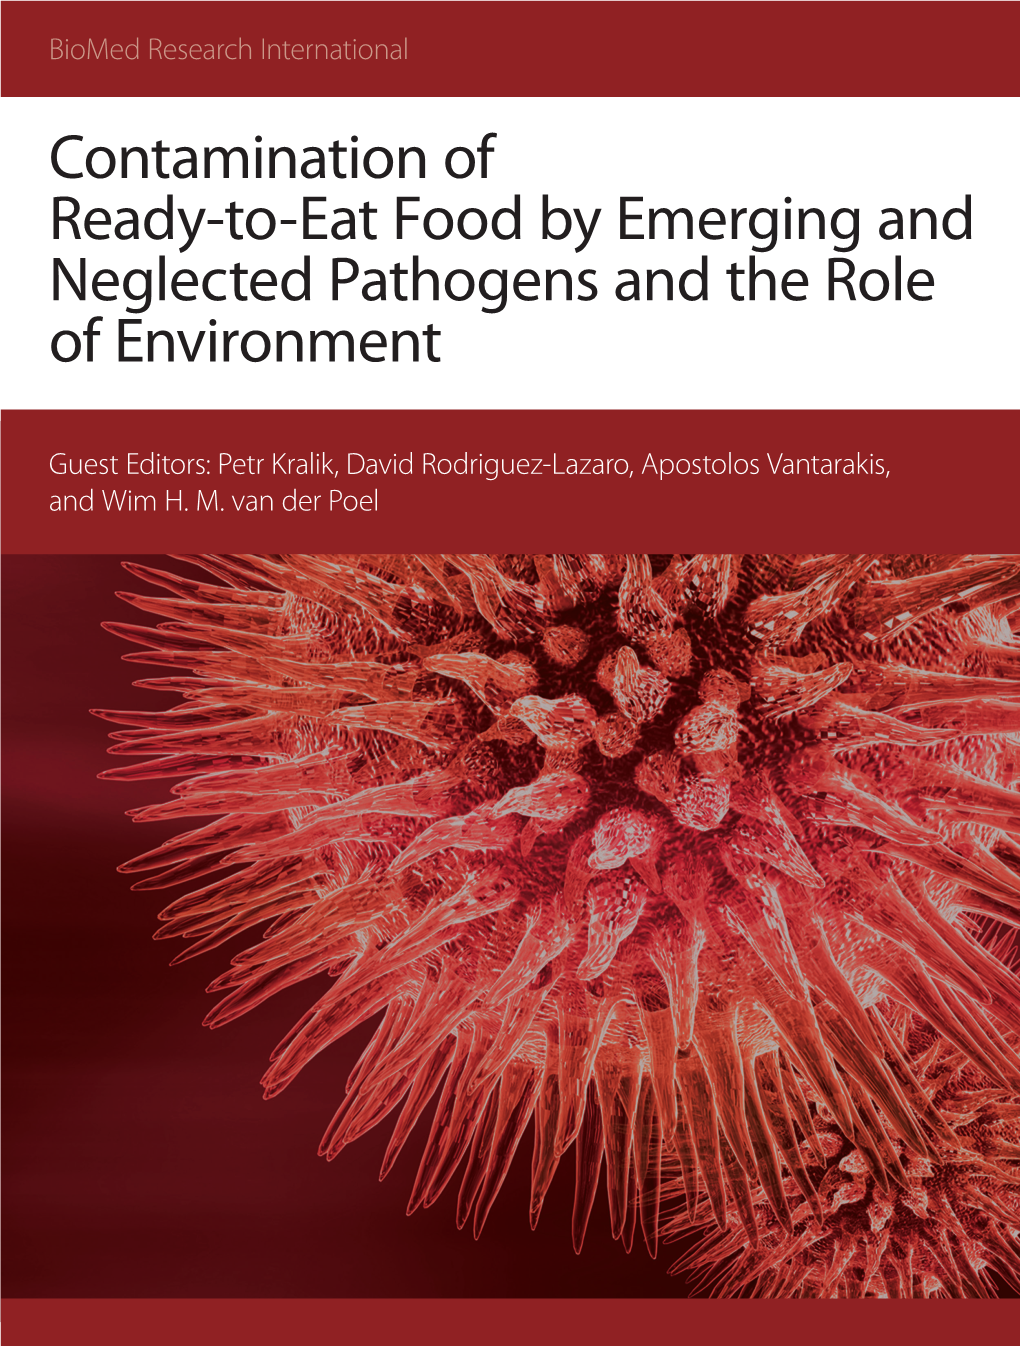 Contamination of Ready-To-Eat Food by Emerging and Neglected Pathogens and the Role of Environment